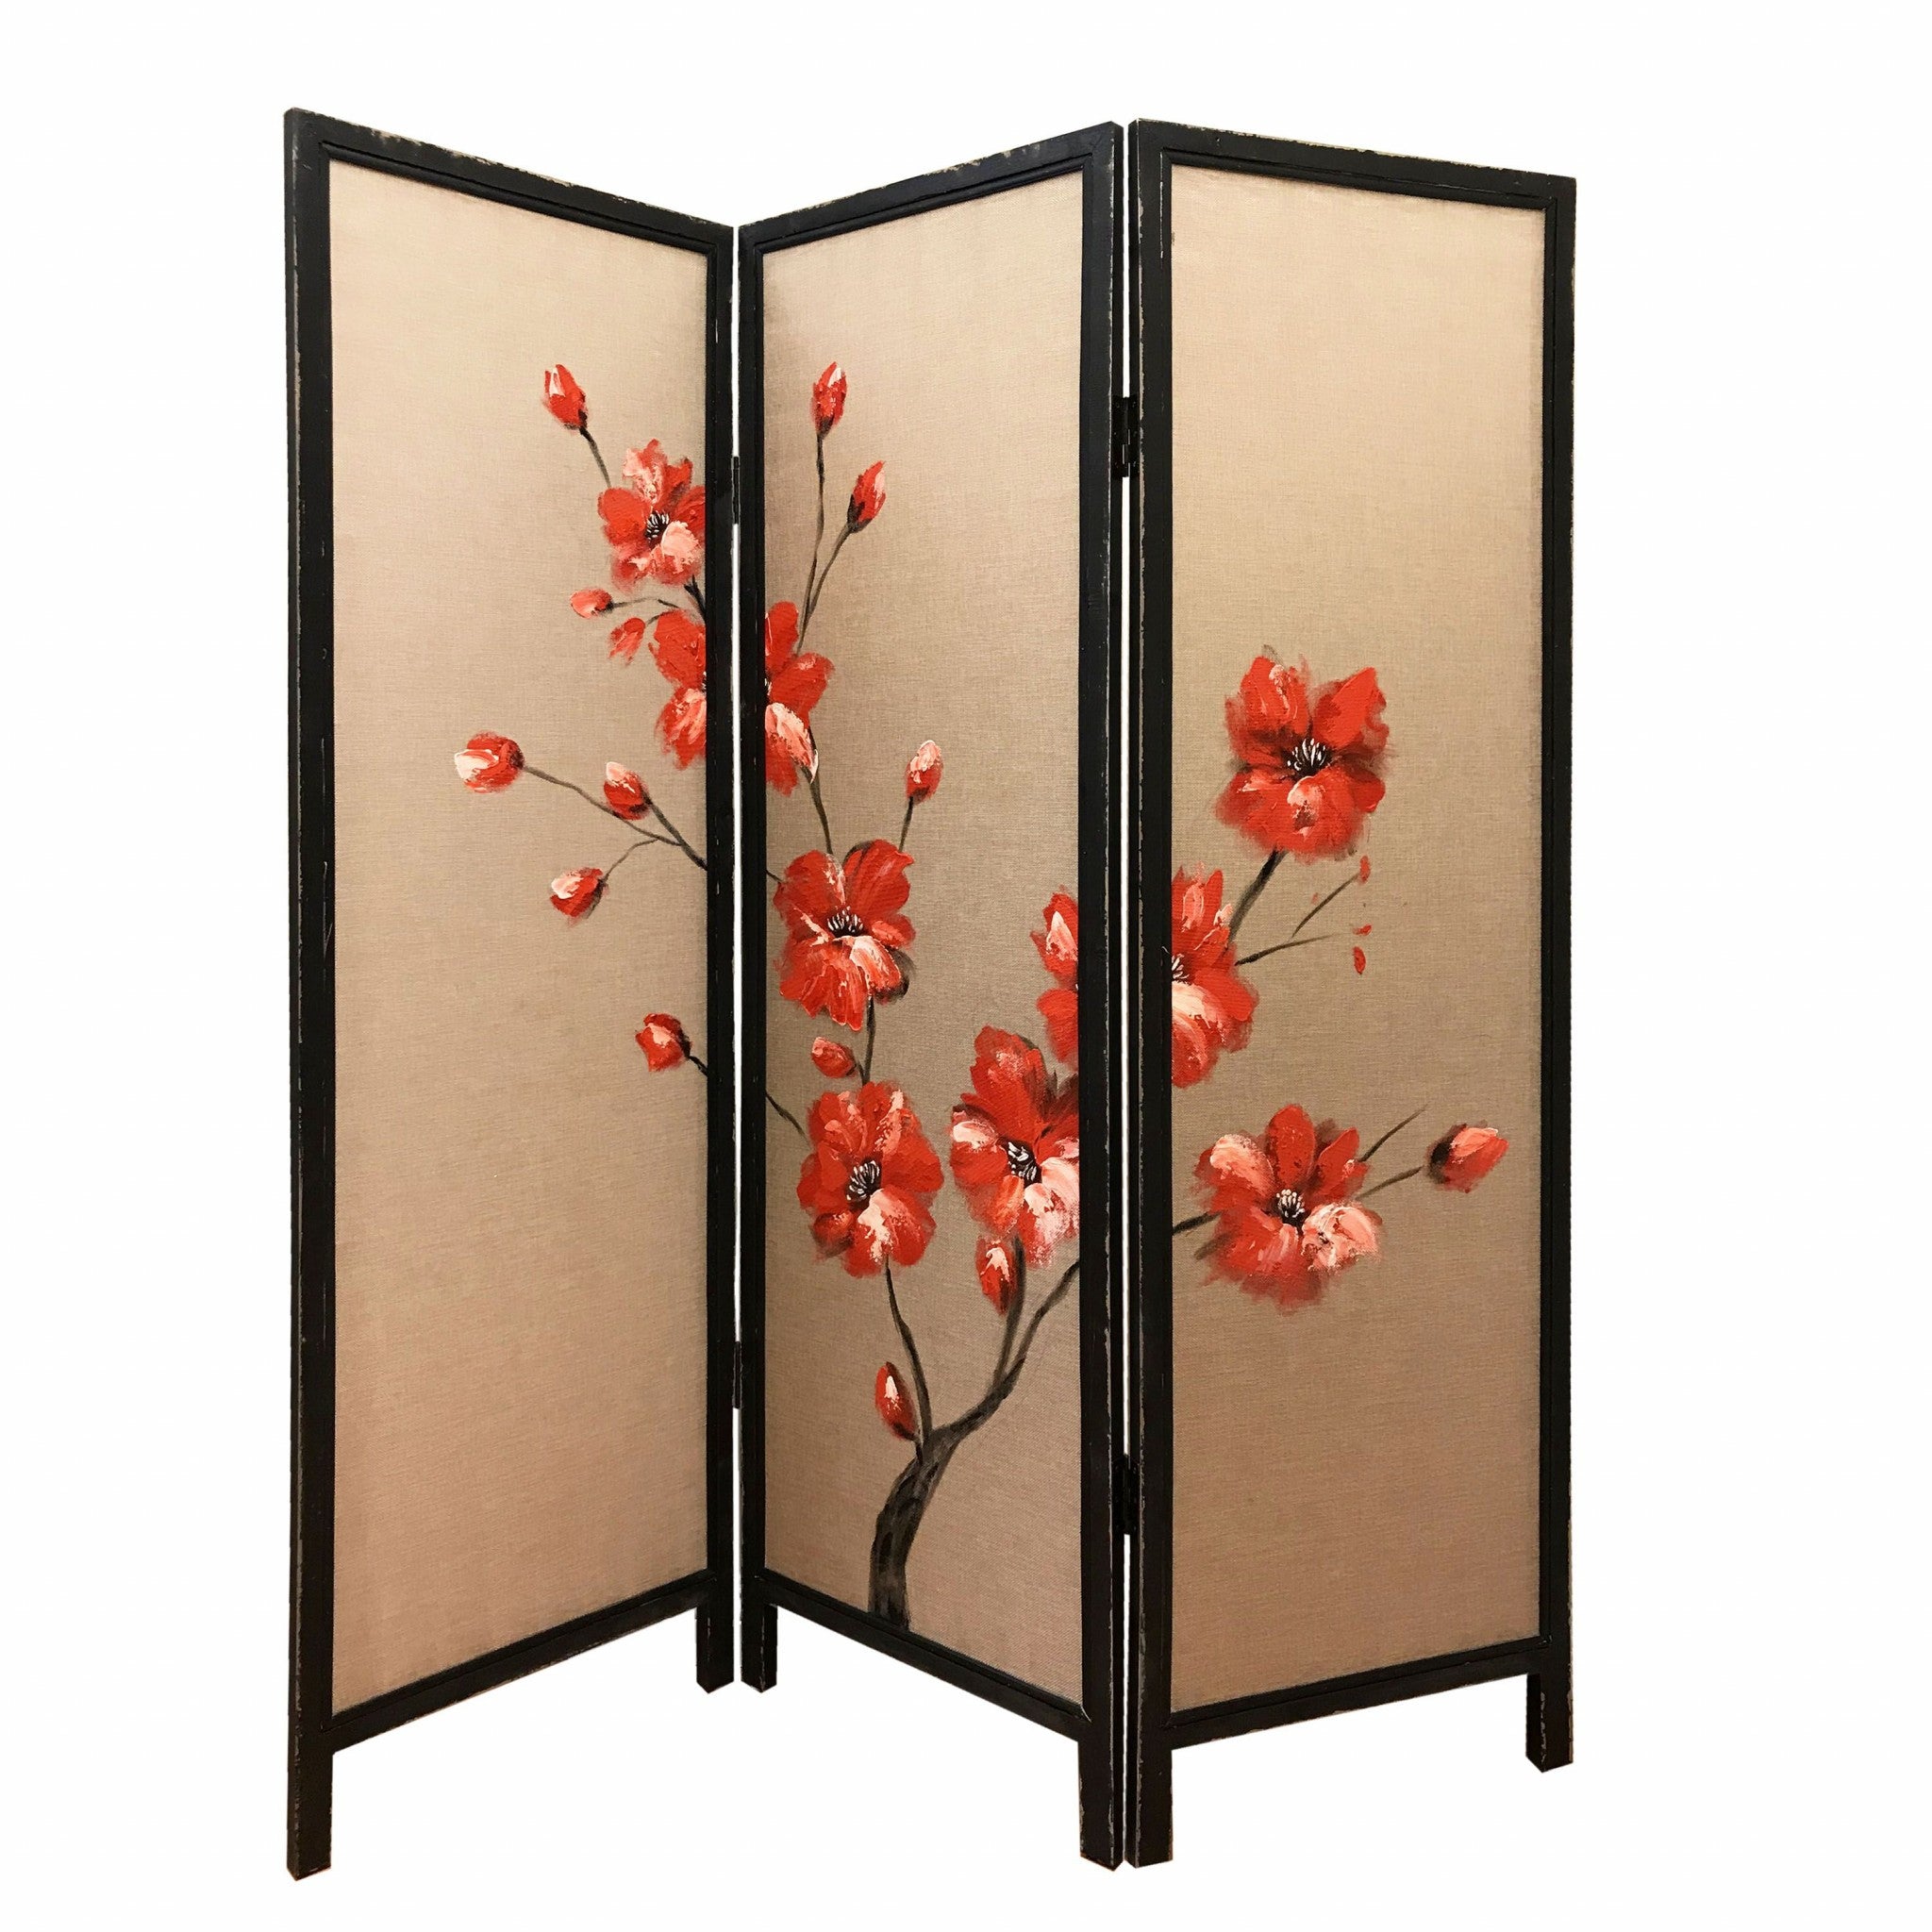 60 x 1 x 63 Brown Fabric And Wood Blooming  3 Panel Screen